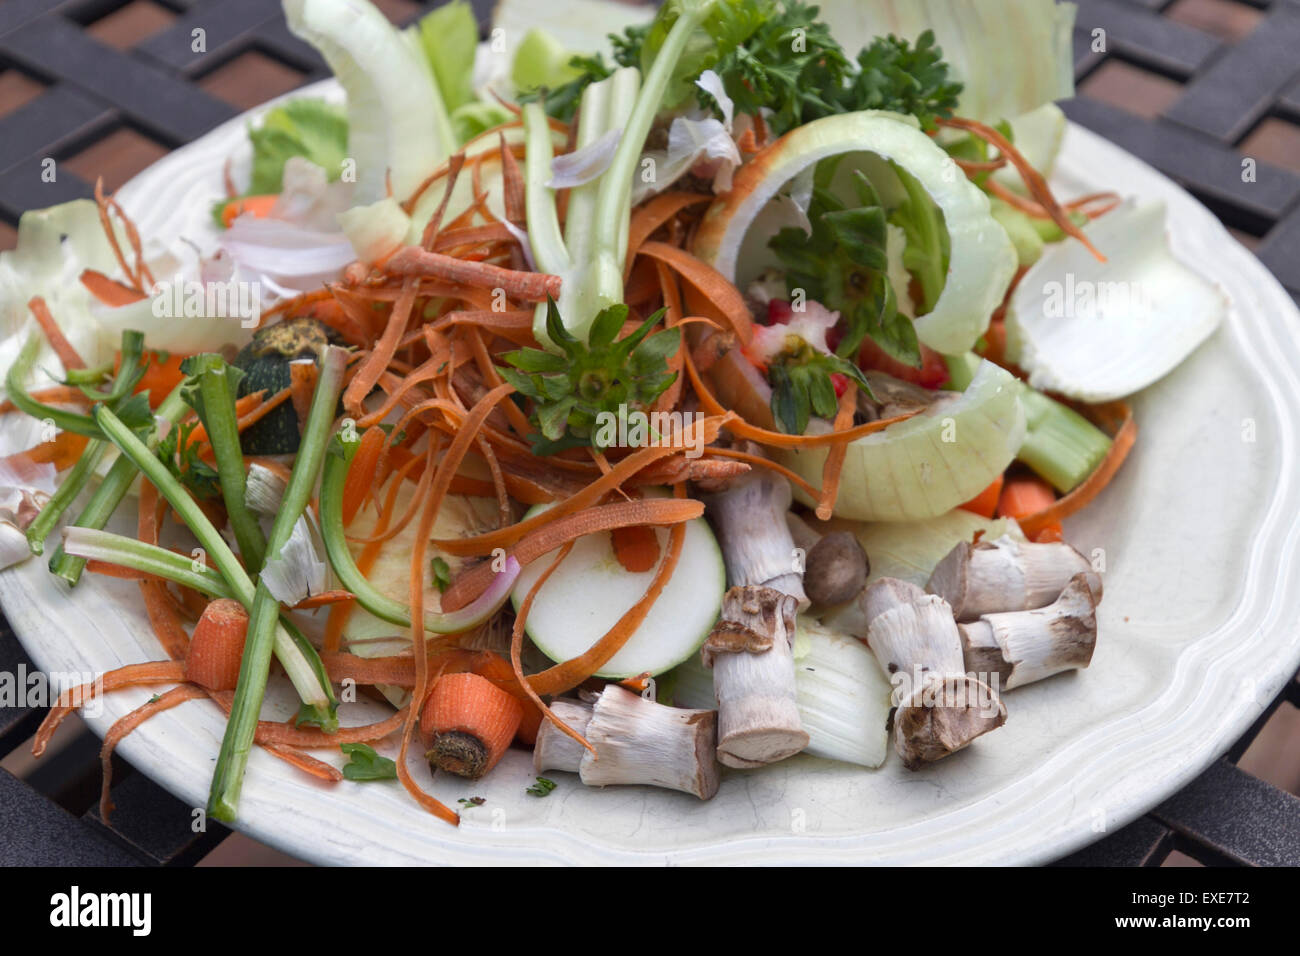 Close up of a plate full of compostable cuttings, scrapings, and peels of vegetables left over from food preparation Stock Photo